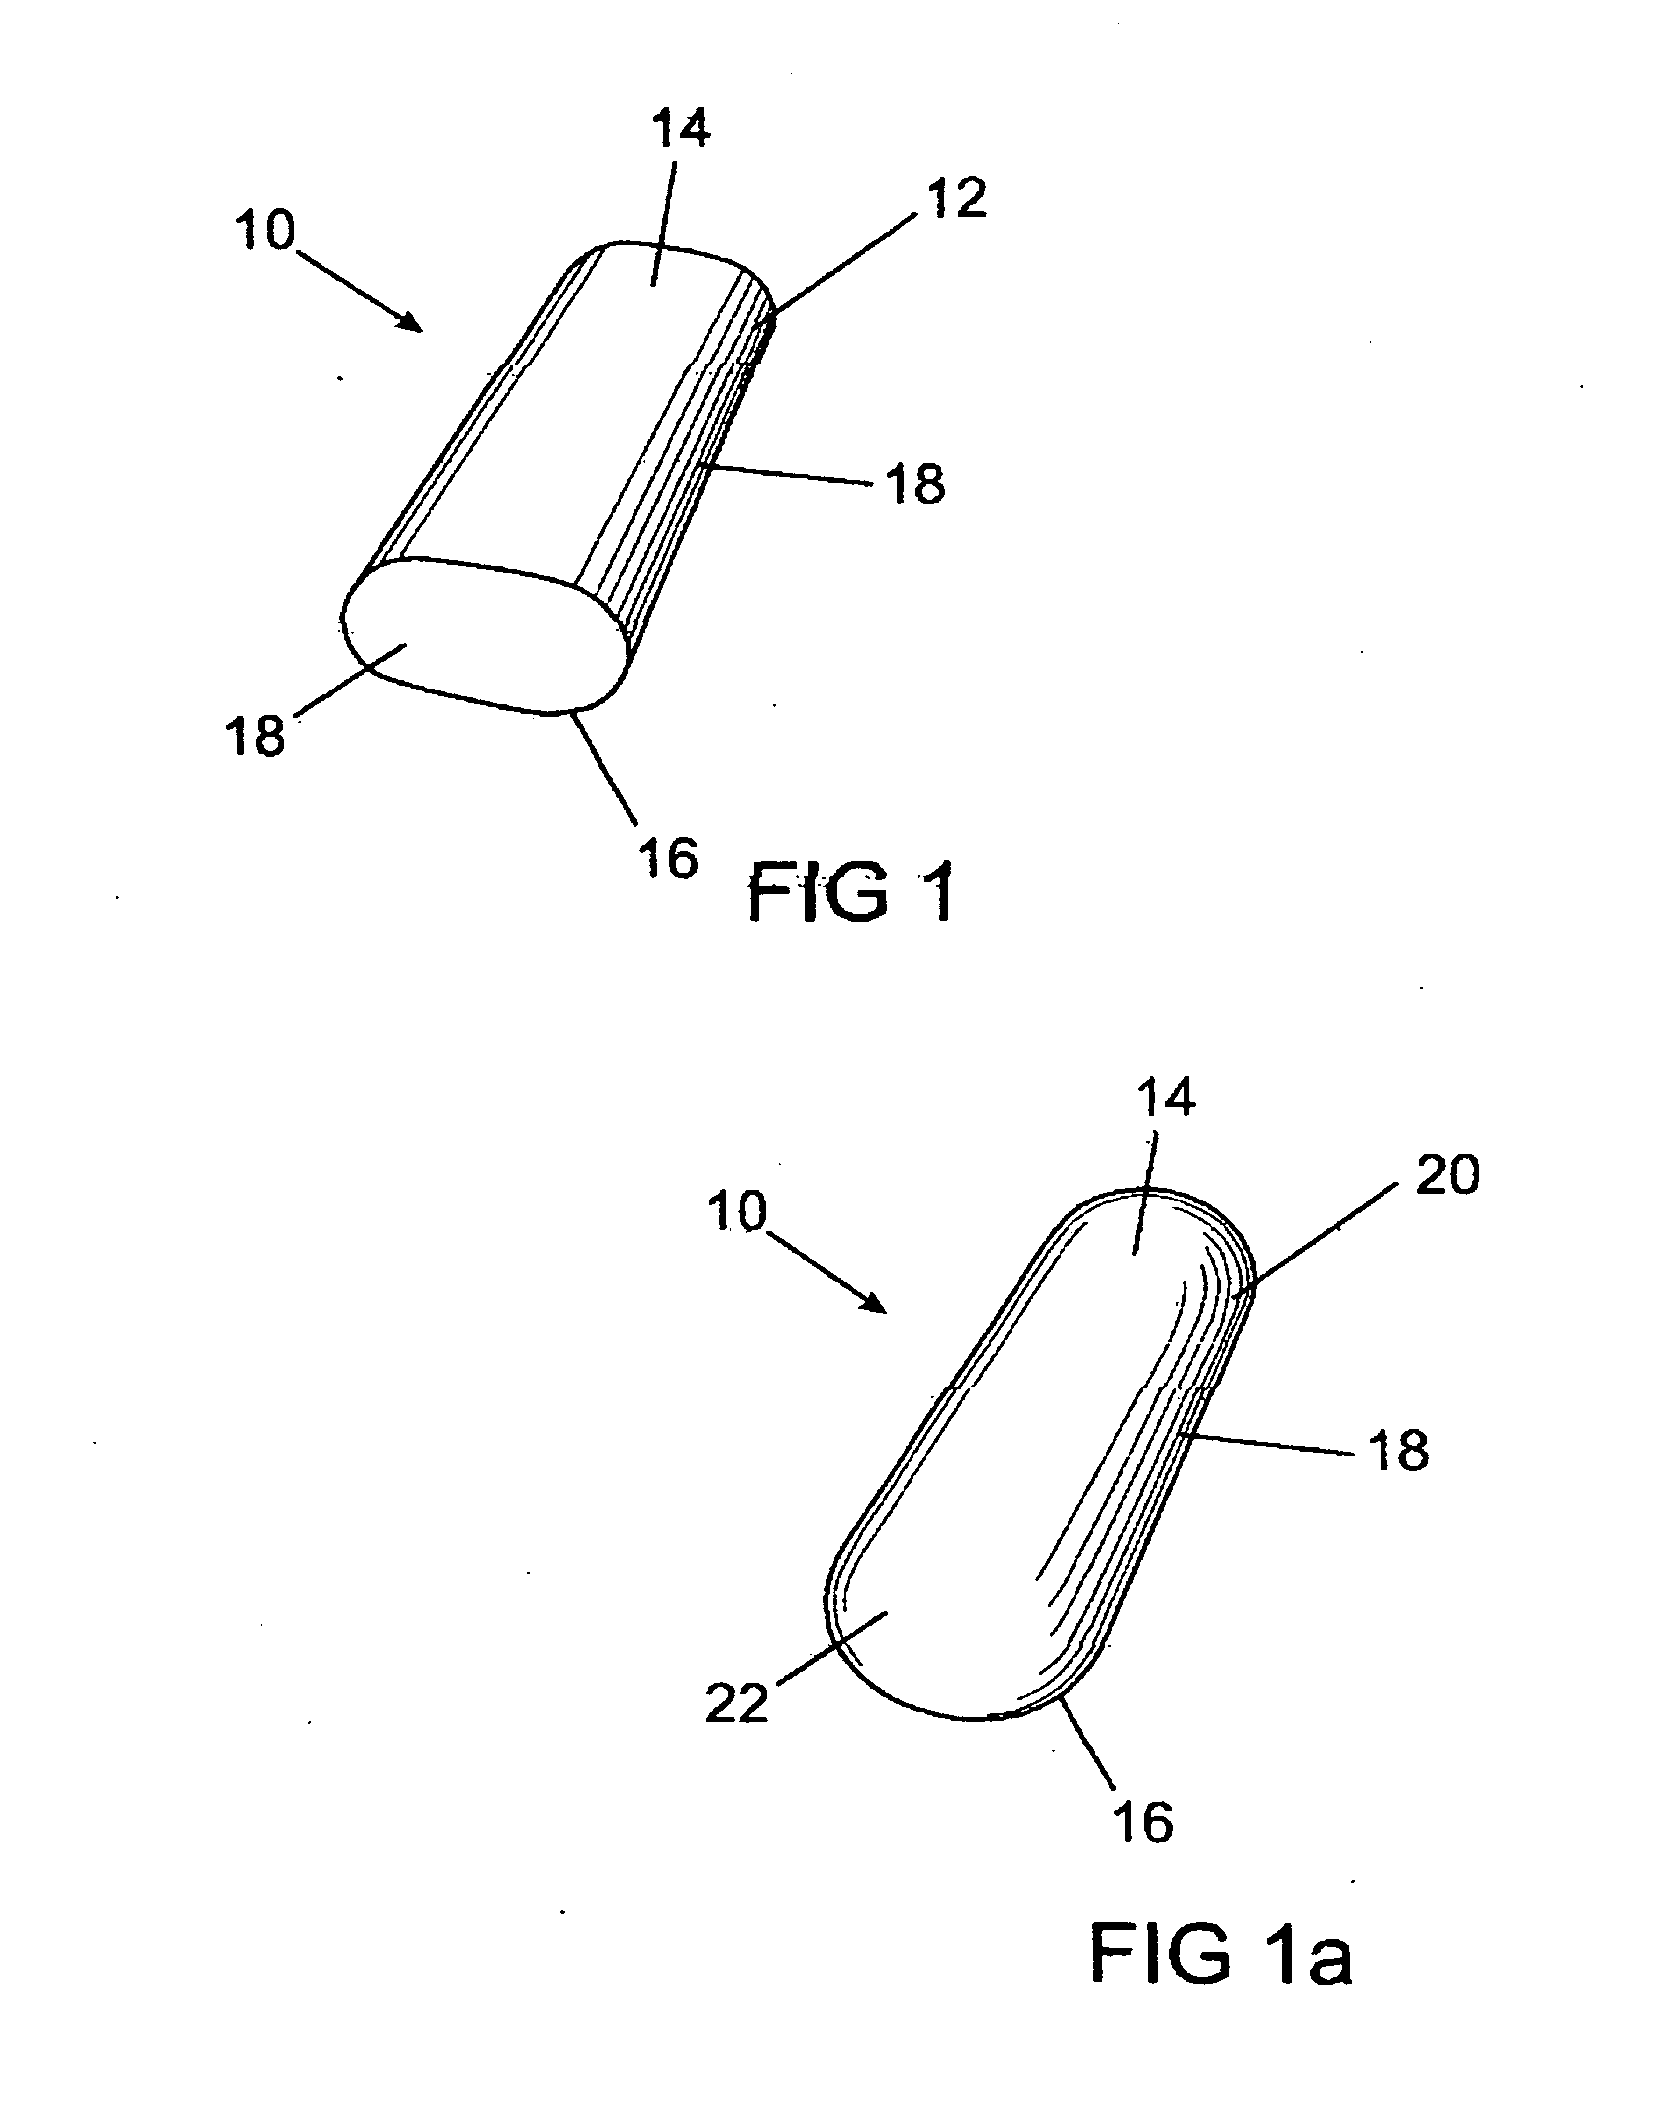 Foot and hand exercise device and method of use